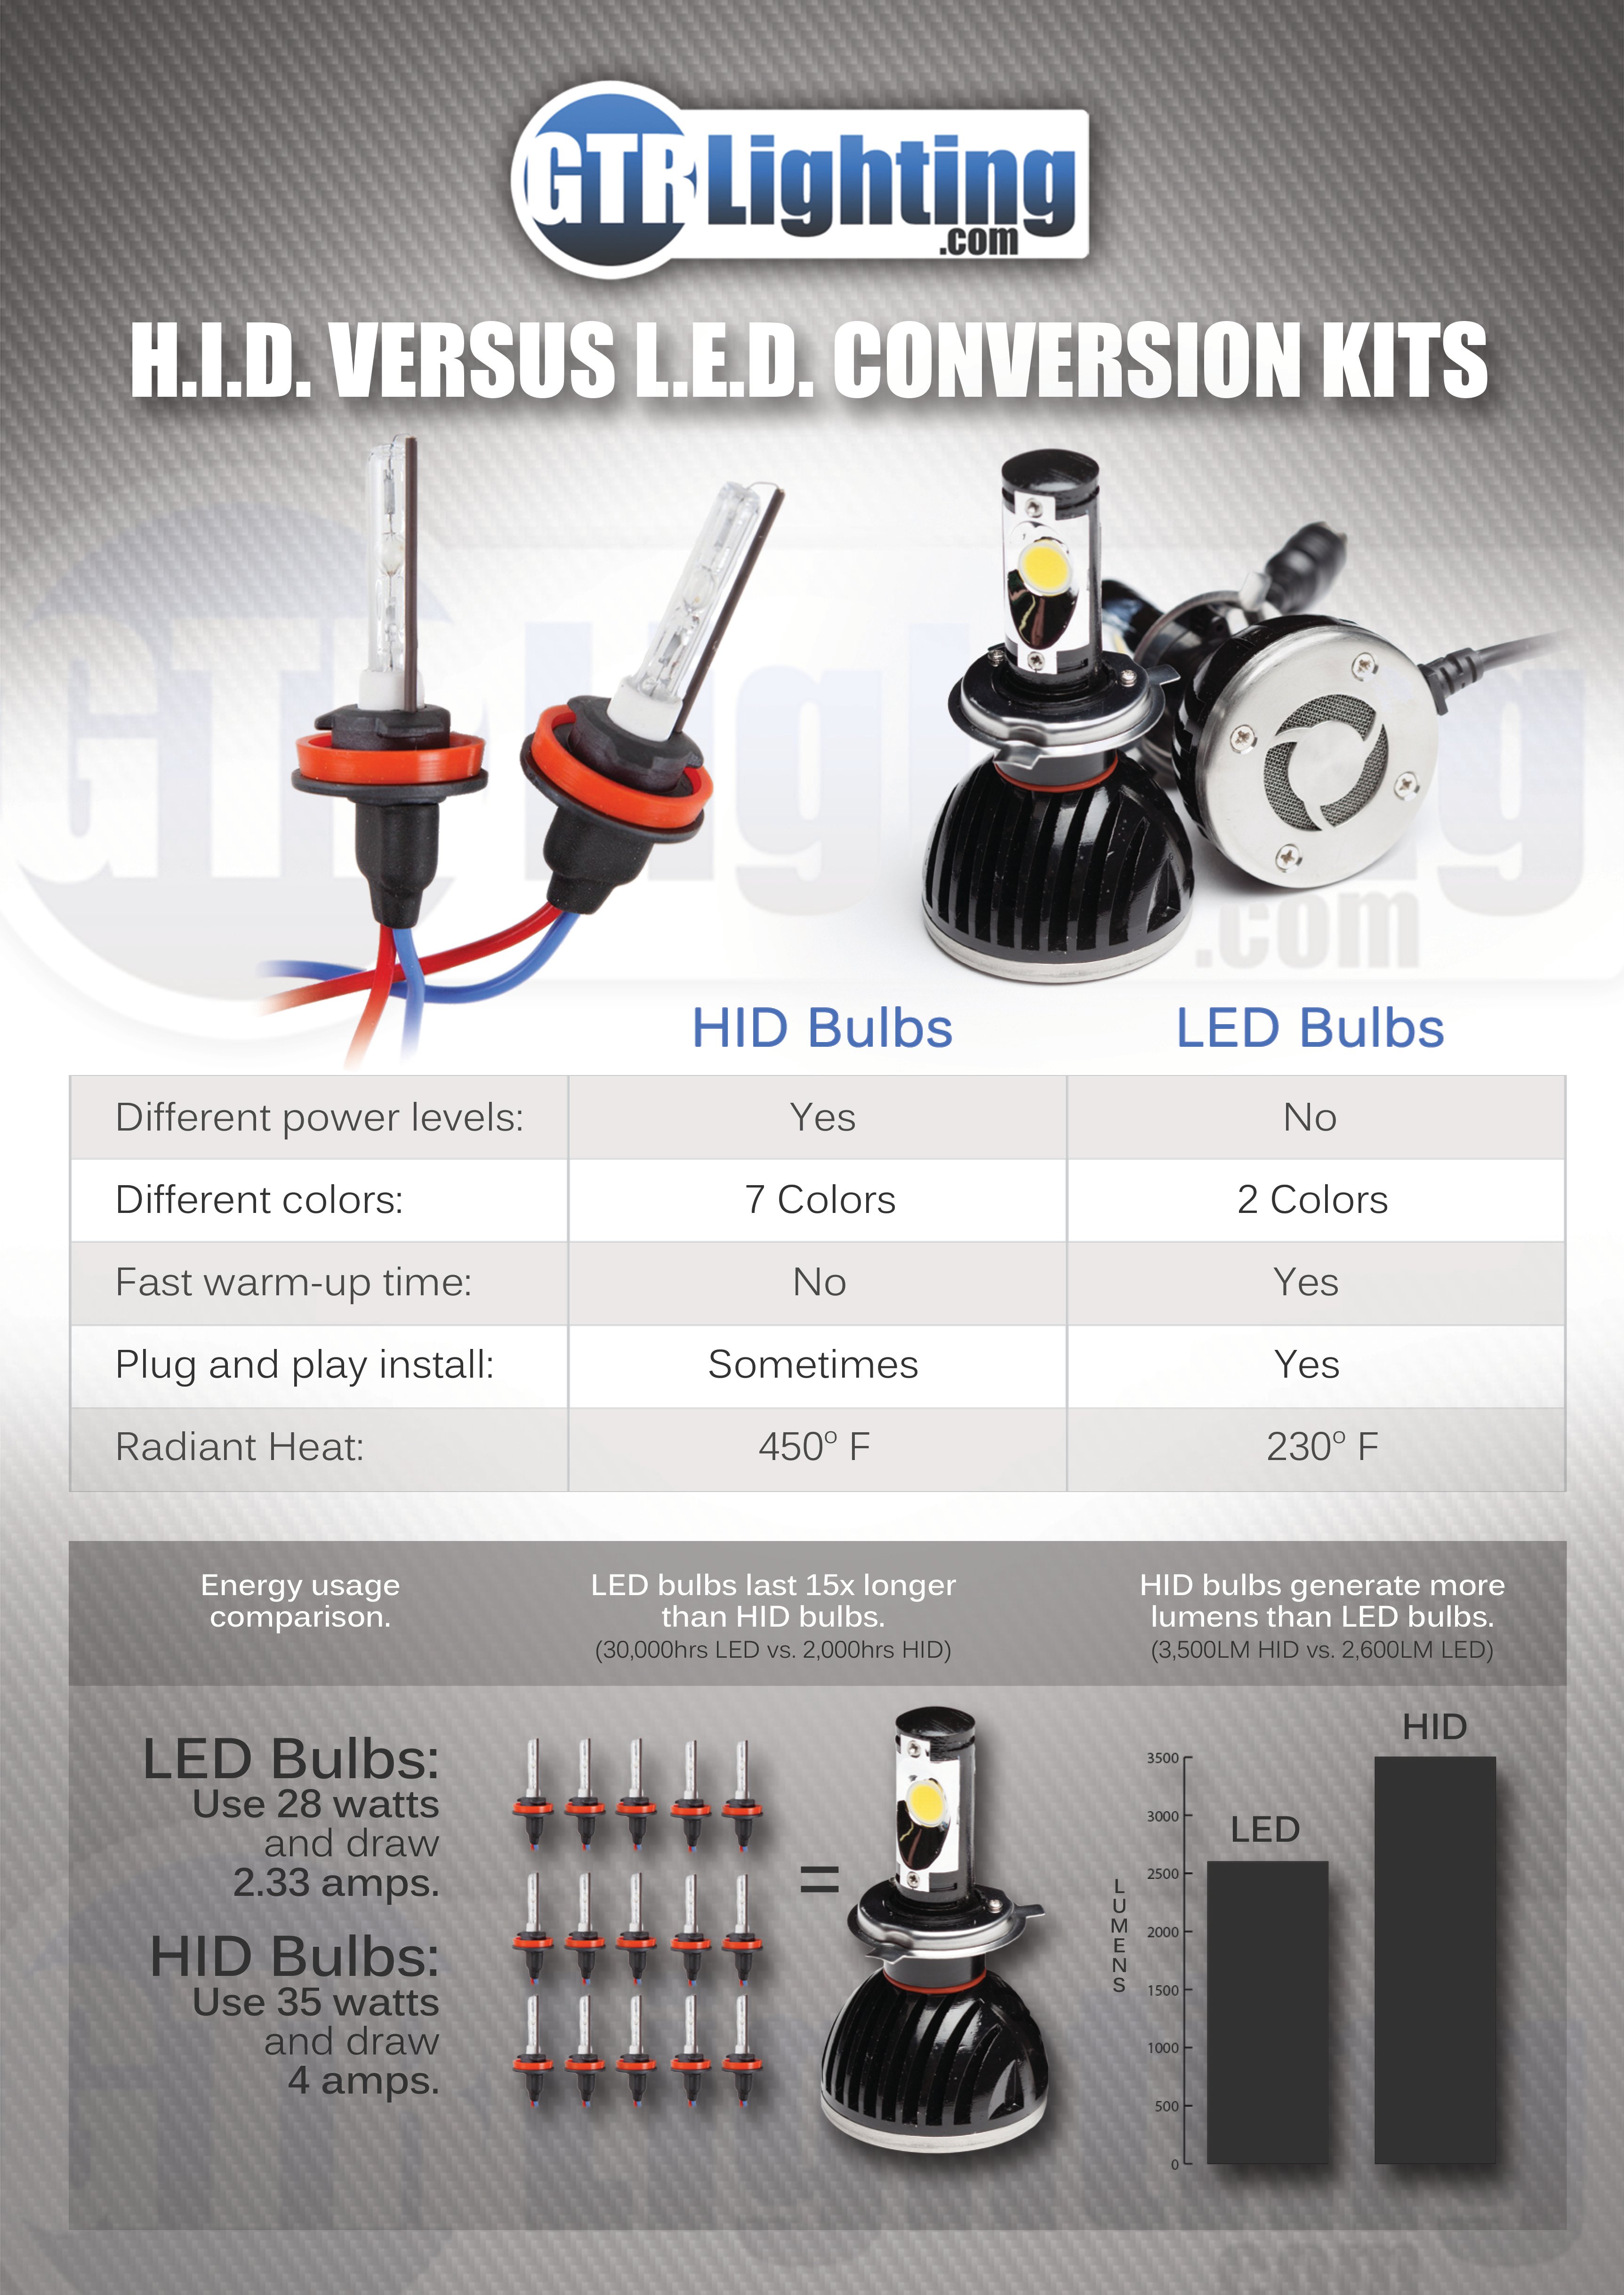 the difference between LED and HID conversion